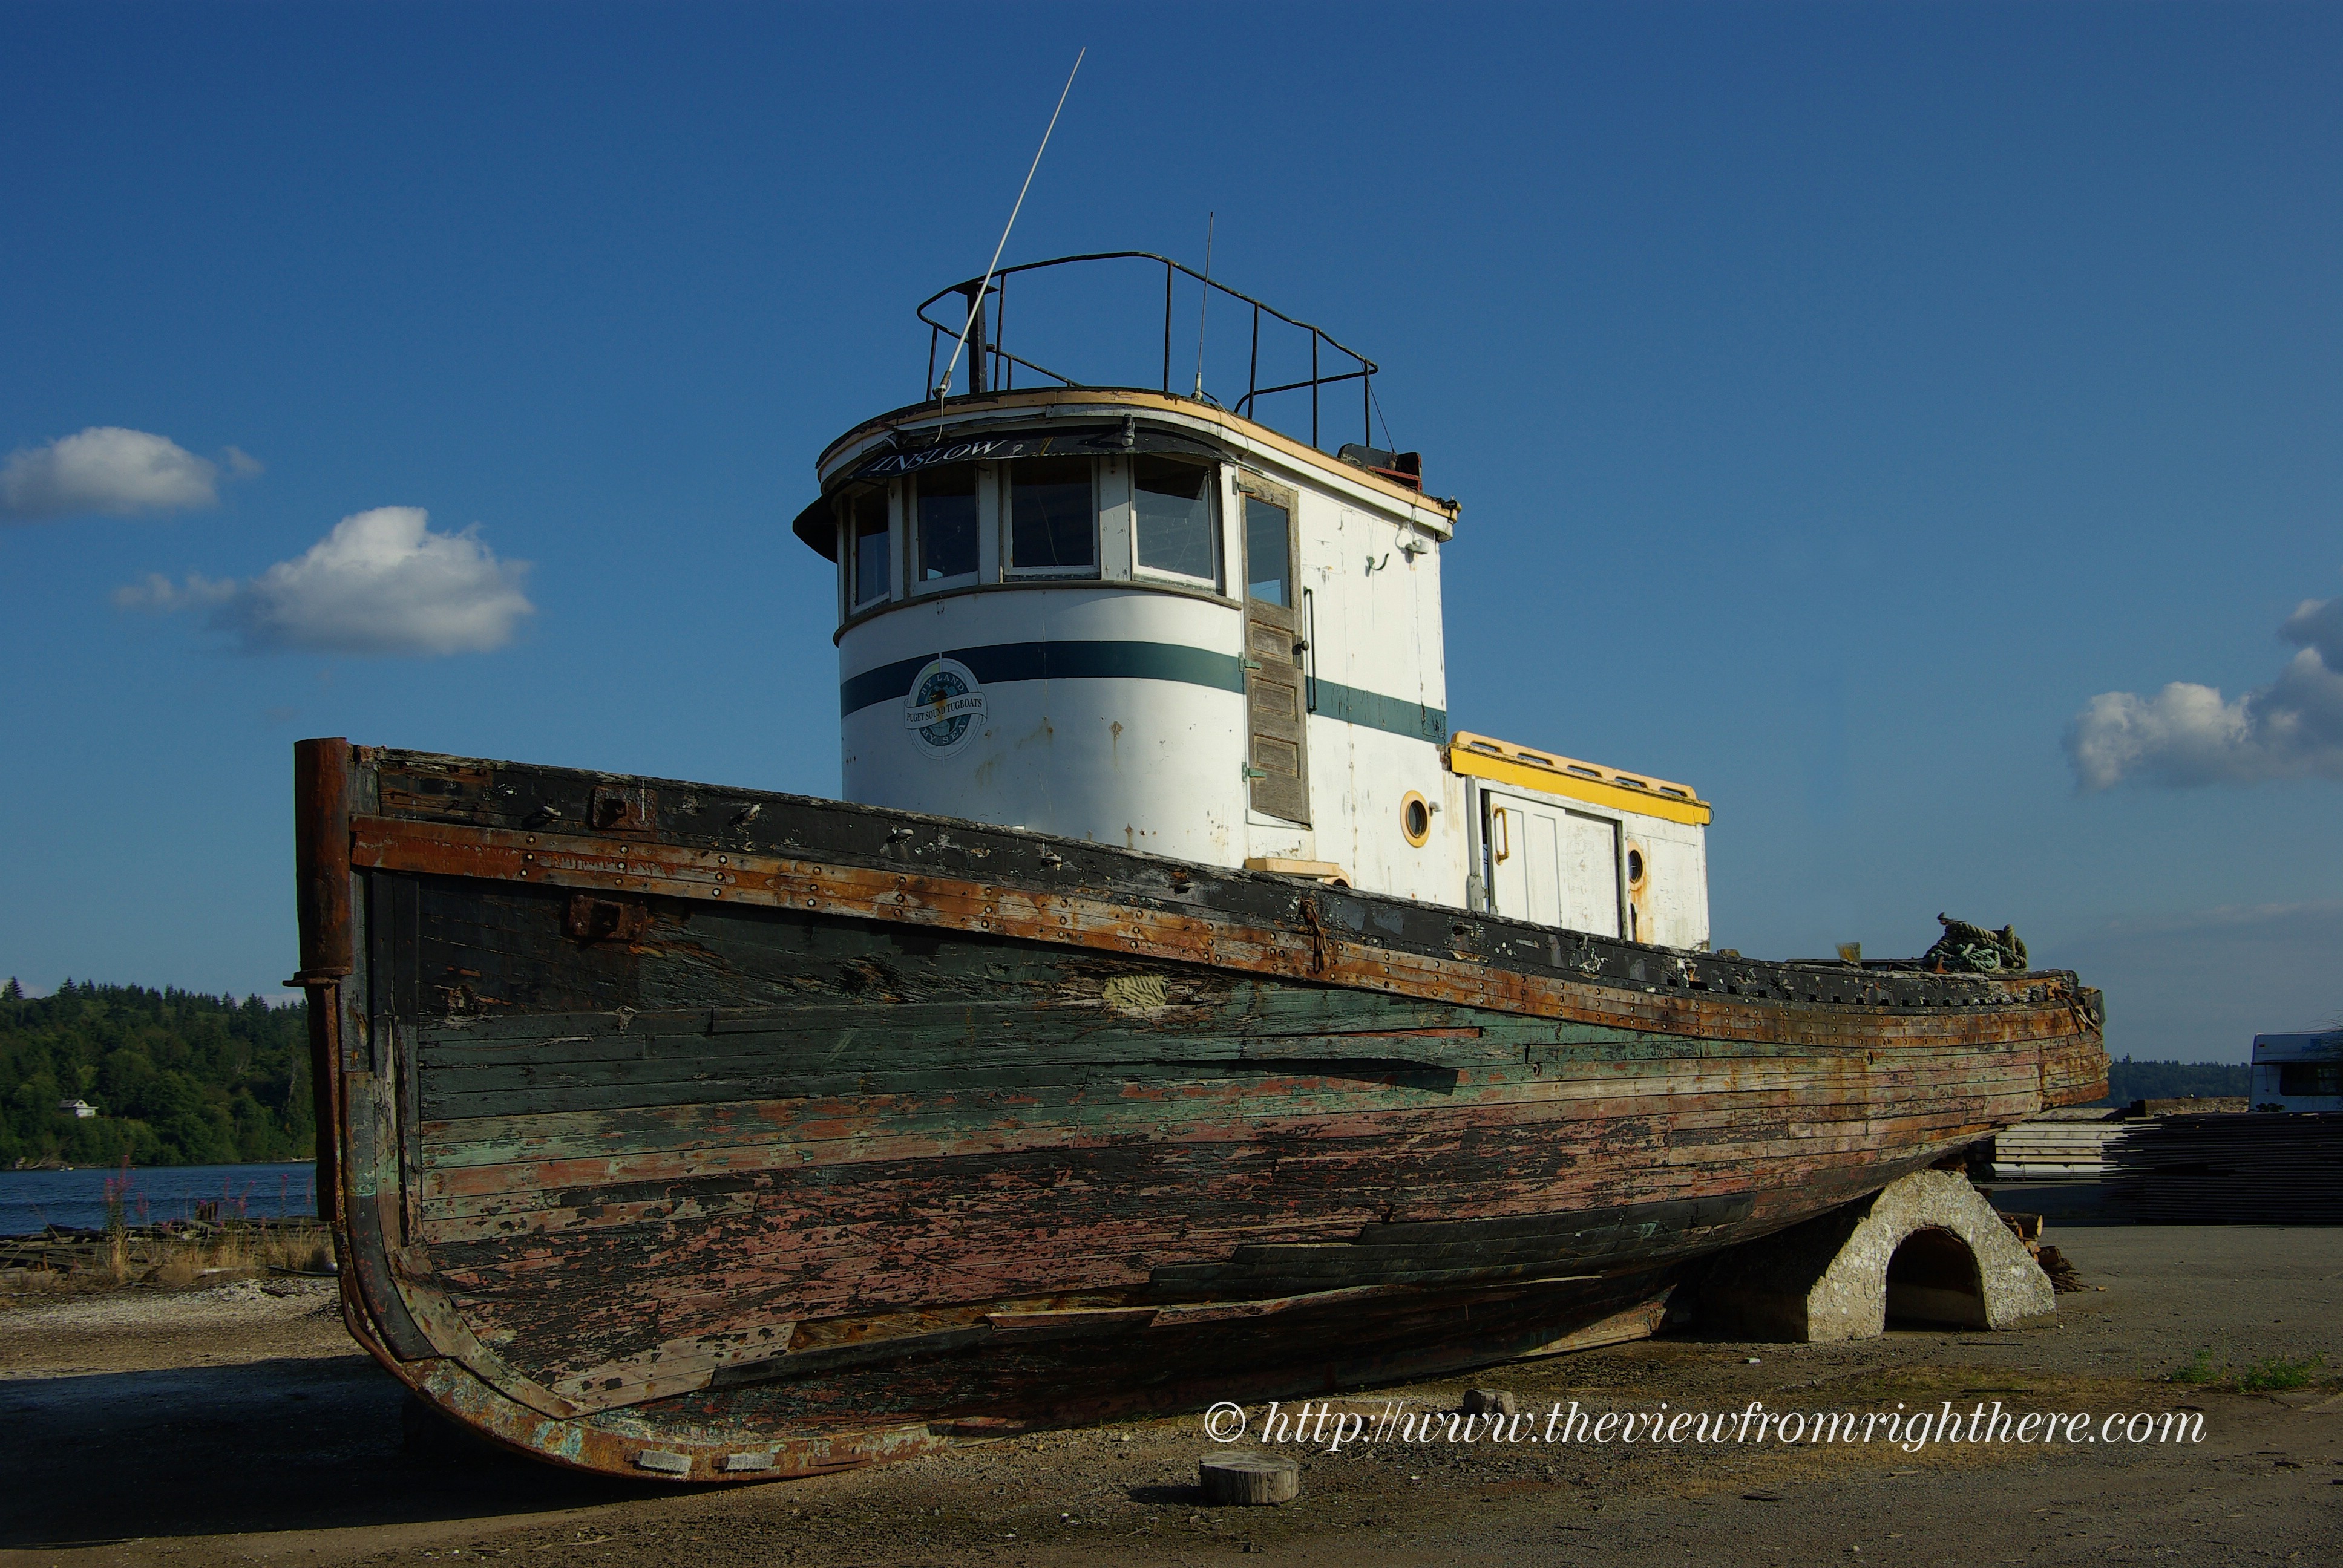 Puget Sound Tugboats – by Land, by Sea